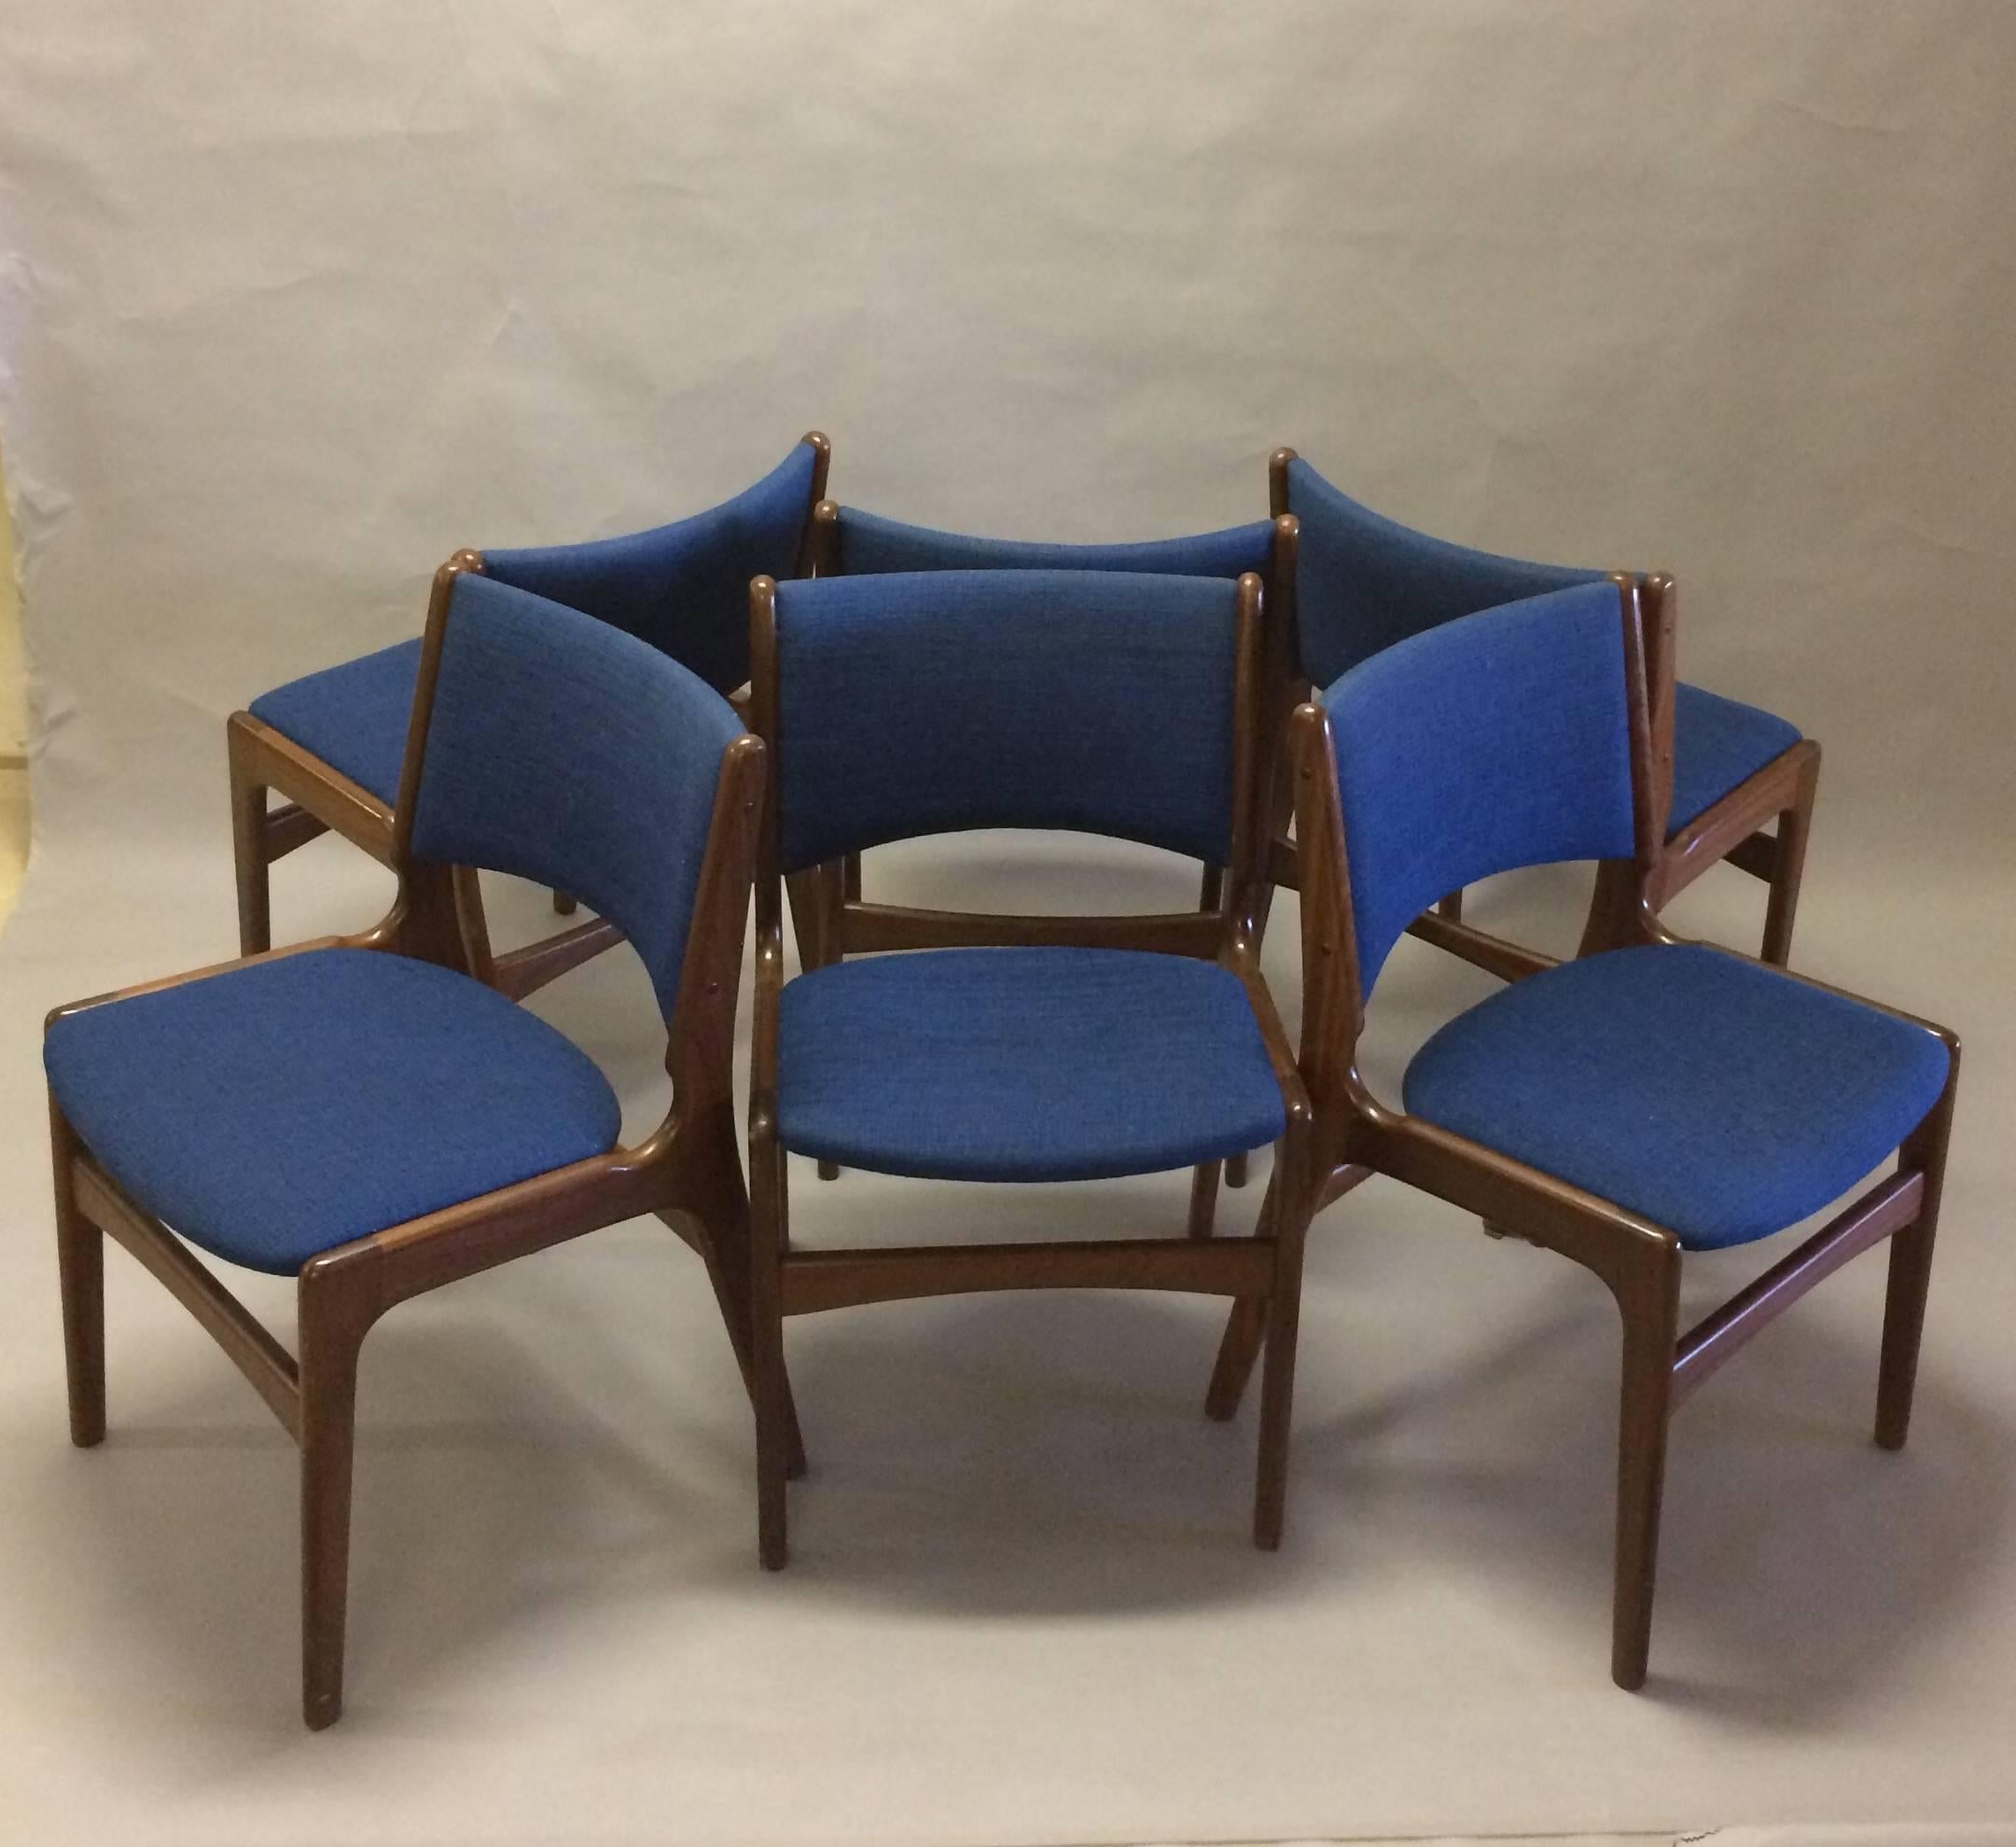 Set of 12 Erik Buch dining chairs made by Odense Maskinsnedkeri.

The chairs feature a solid teak frame and are as all of Erik Buchs chairs characterized by high-quality materials, solid craftsmanship, Scandinavian aesthetic and not least a